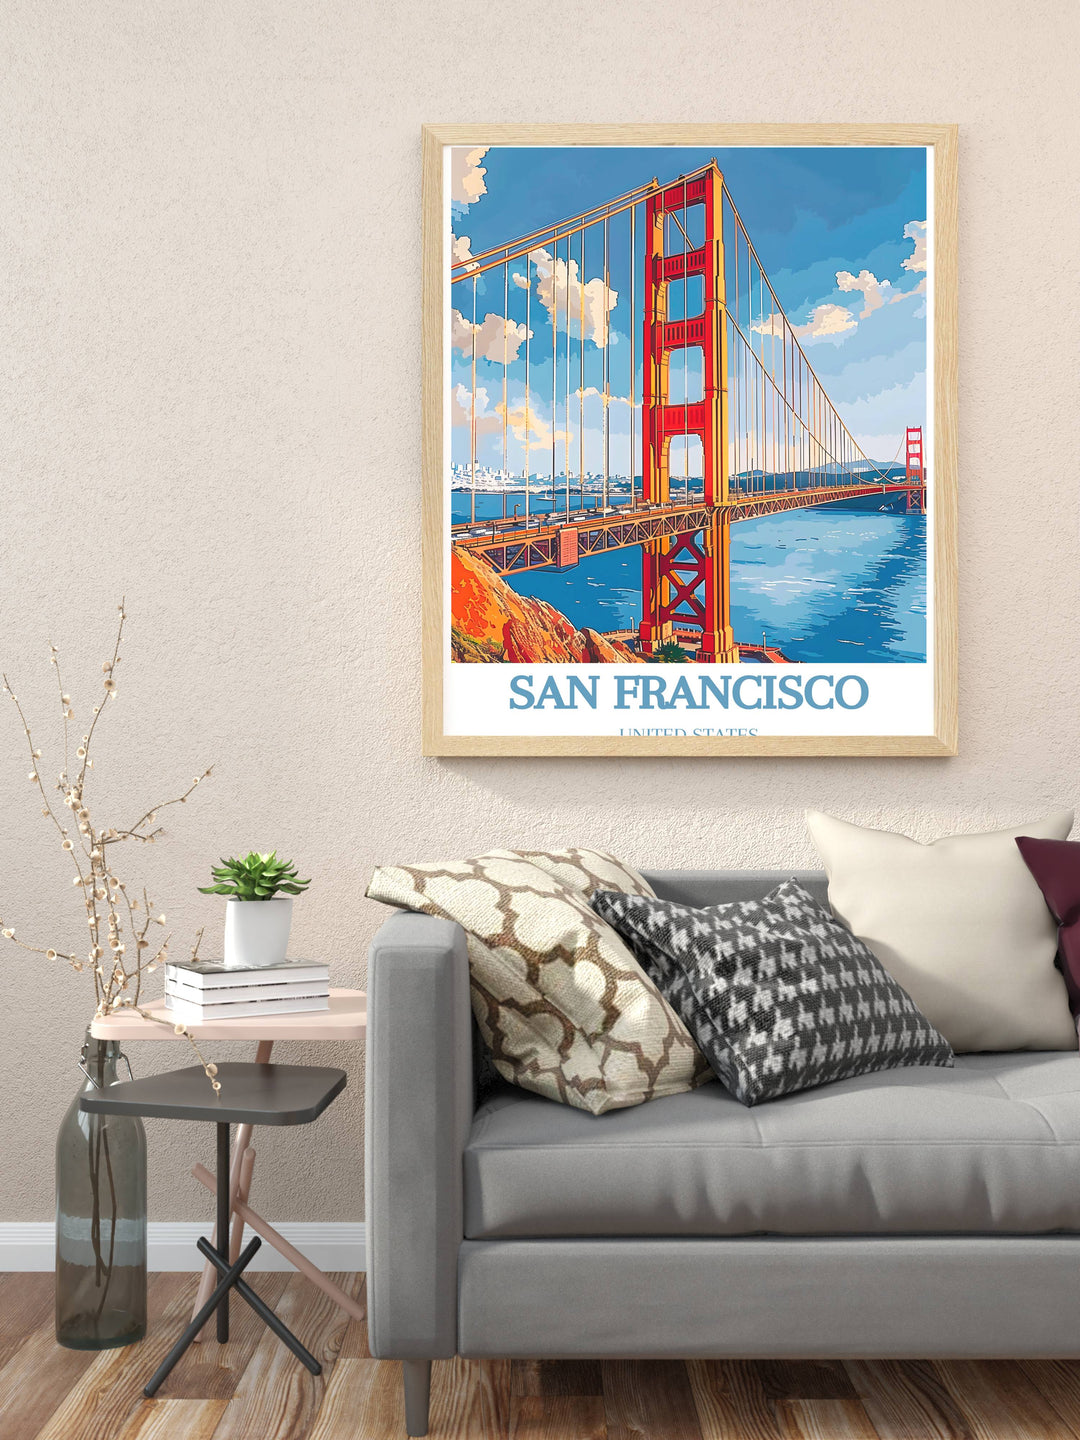 San Francisco Fine Art Print capturing the vibrant energy and unique charm of the citys iconic Golden Gate Bridge, ideal for home decor.